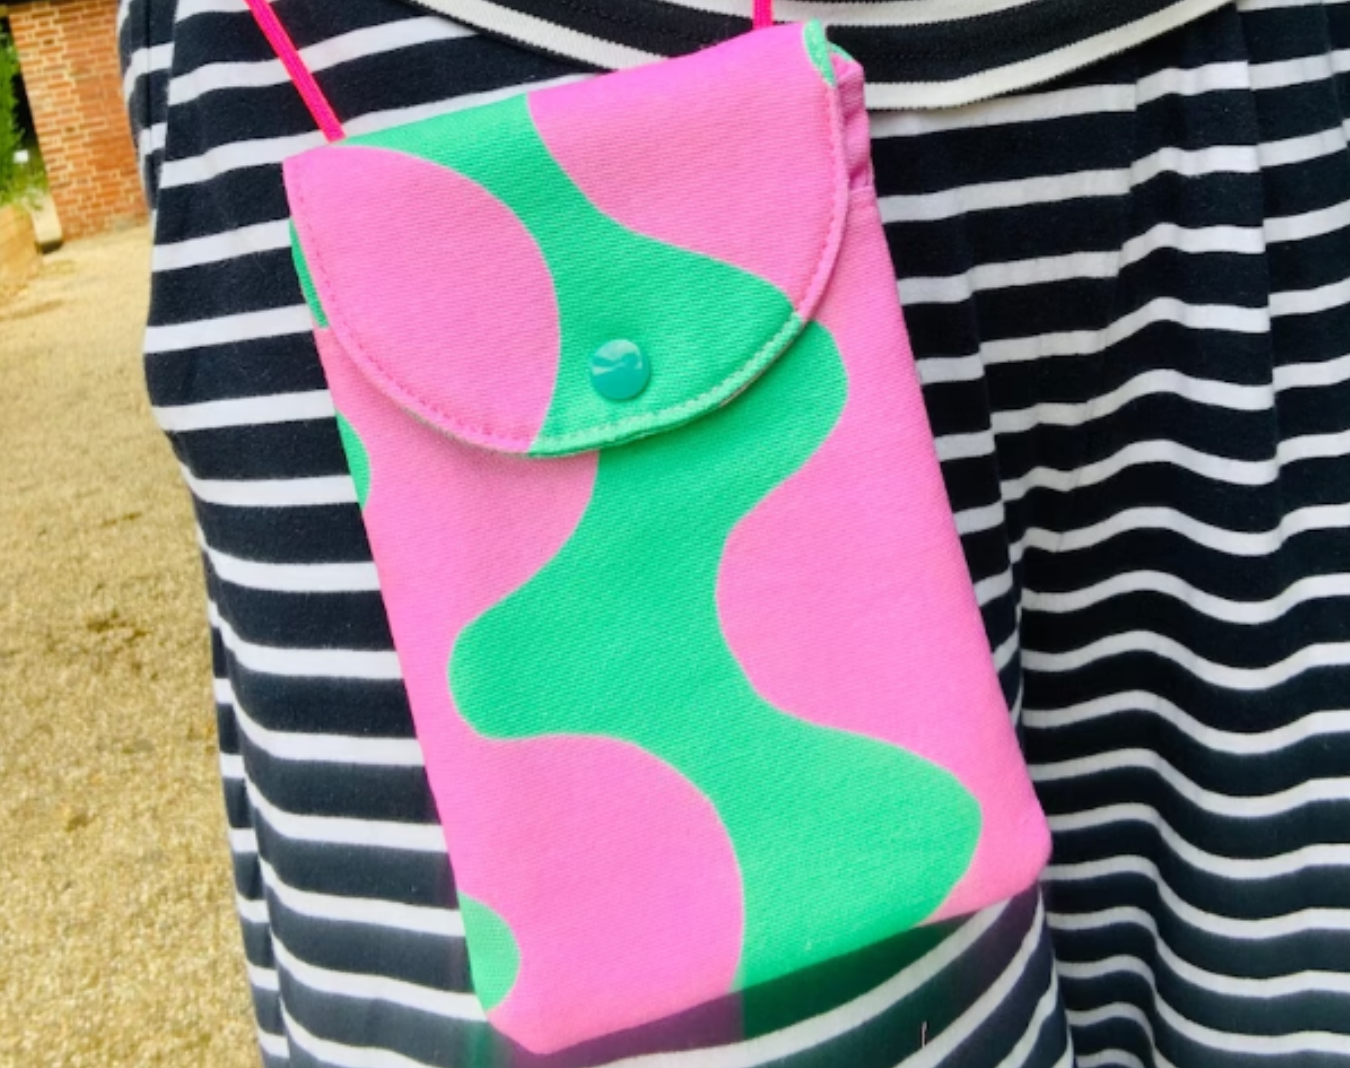 Stylish gift for teens: Crossbody phone purse with vibrant colors and playful pattern.